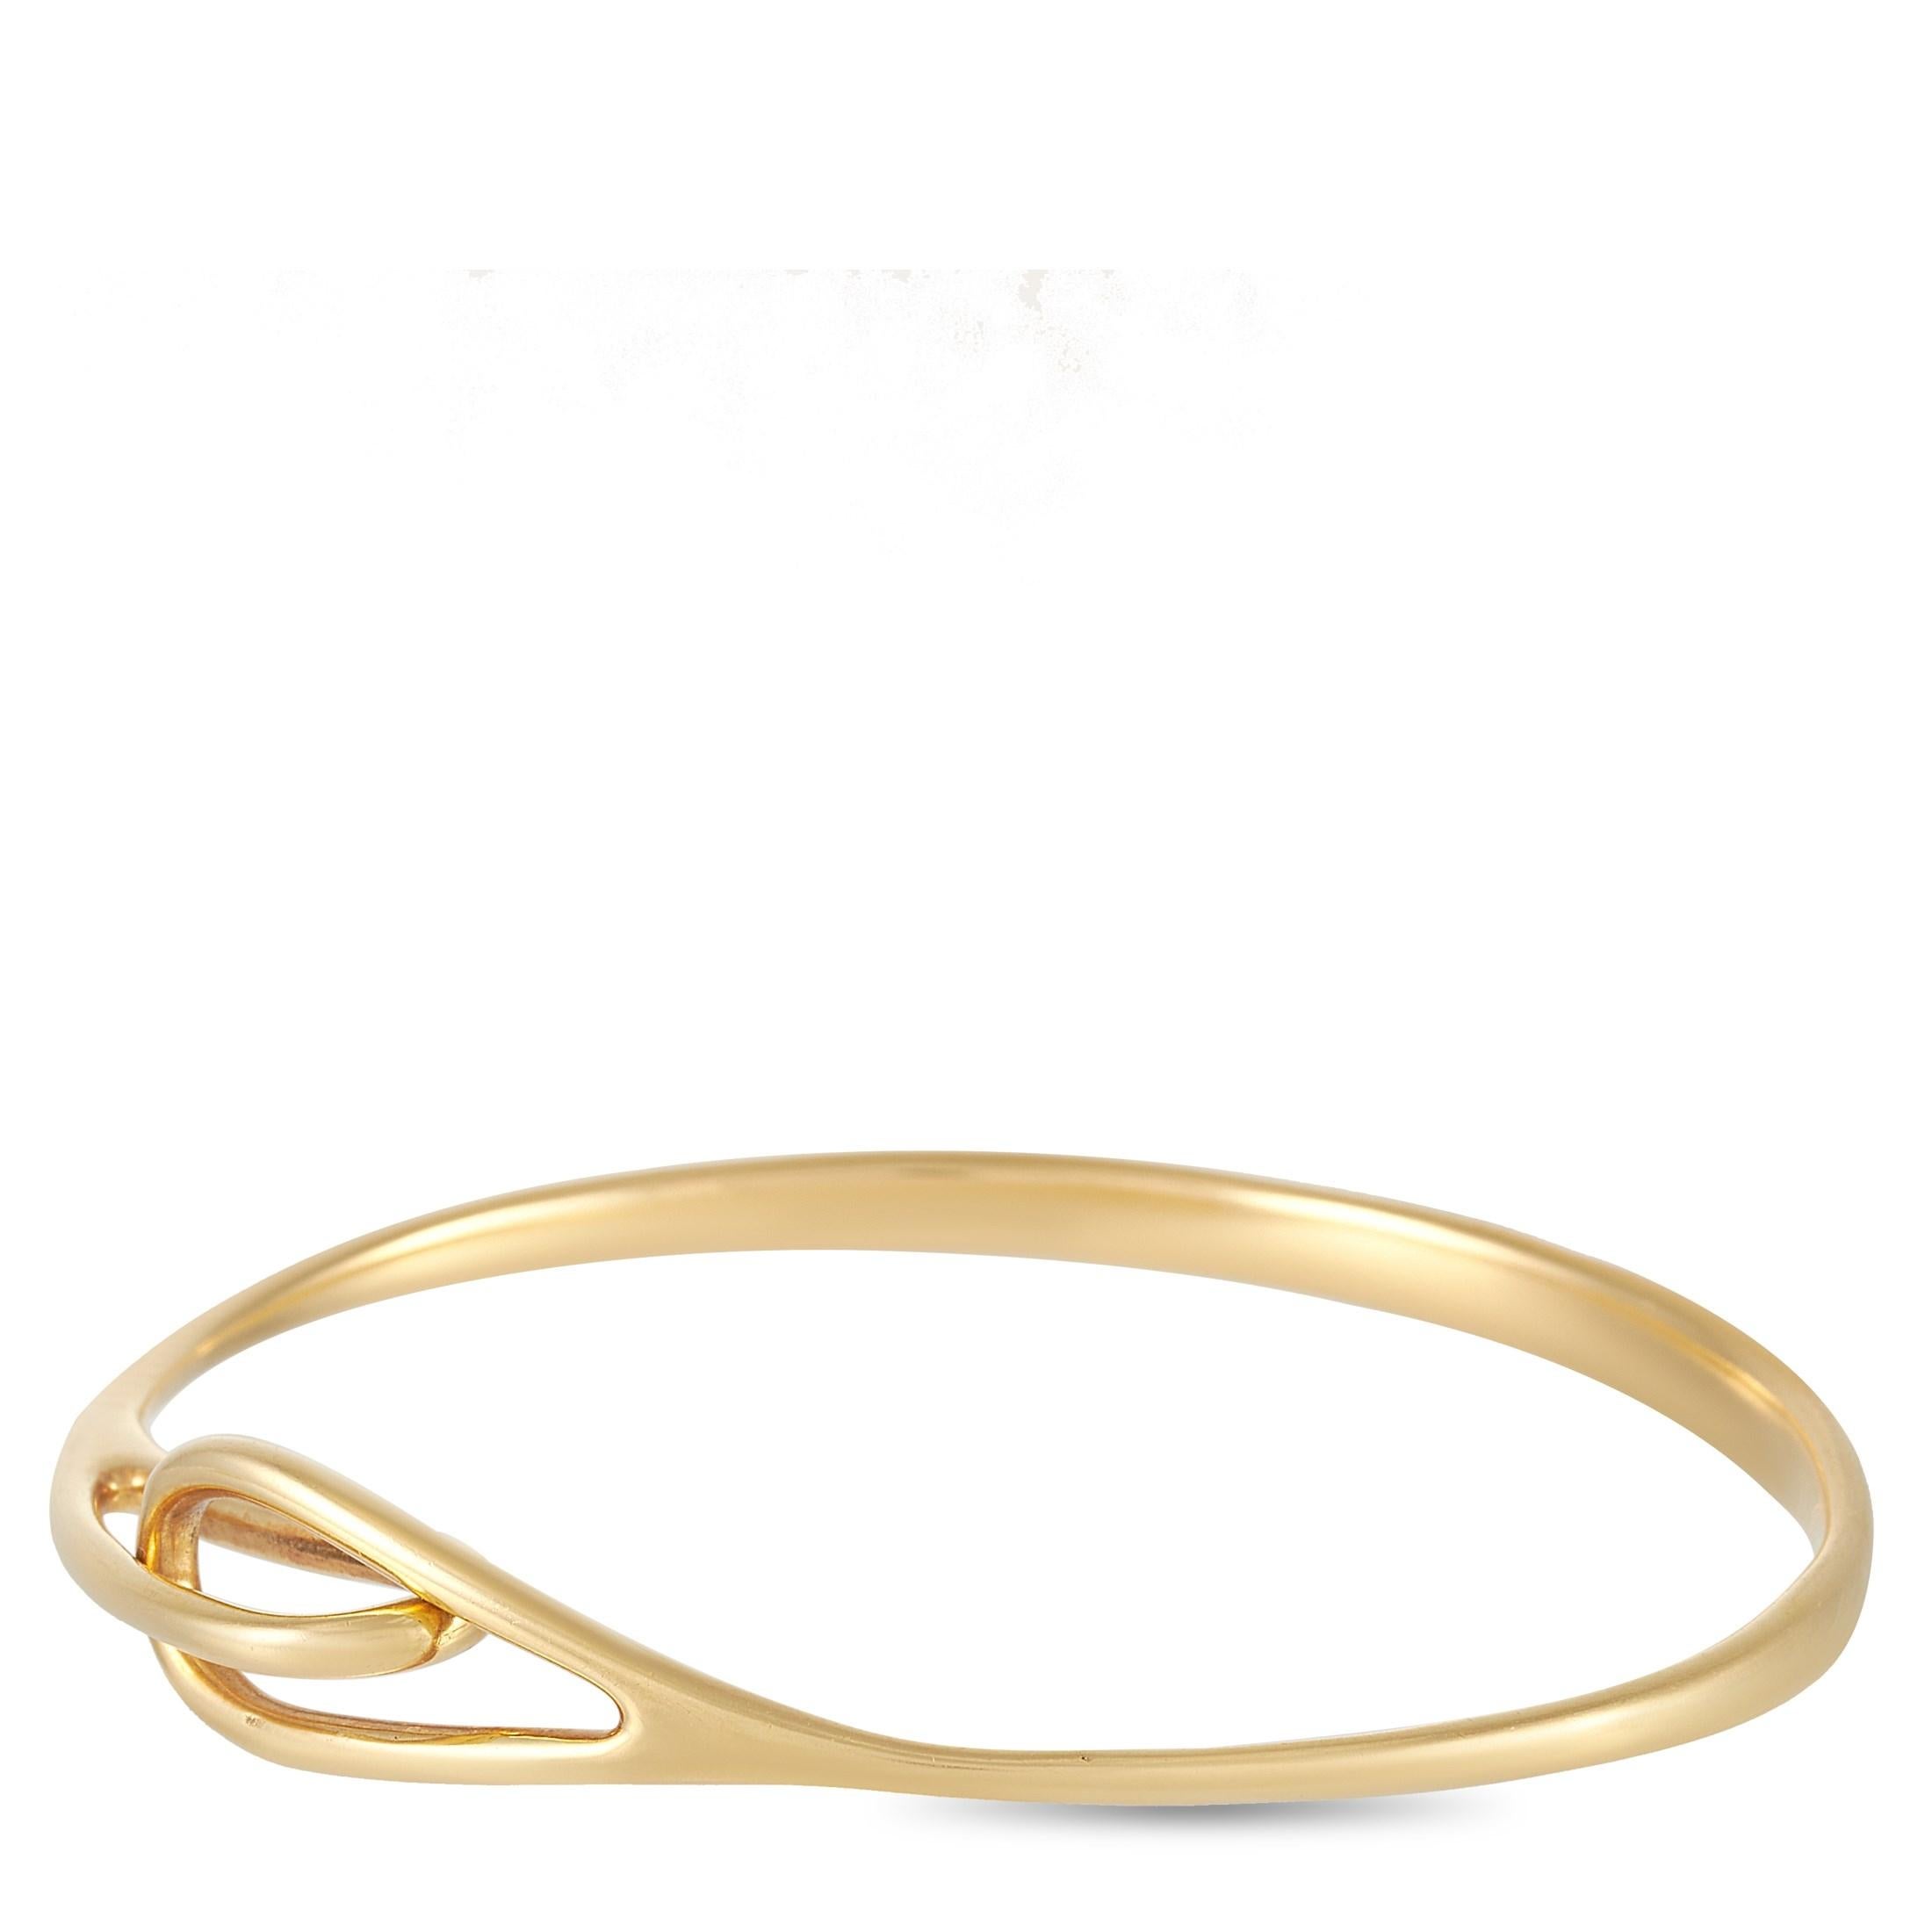 This Tiffany & Co. 18K Yellow Gold Bangle Bracelet is simple but pretty, the bangle measures 7.85 inches in diameter and links together in the front. The bangle weighs a total of 21.8 grams. 

This bracelet is presented in estate condition and